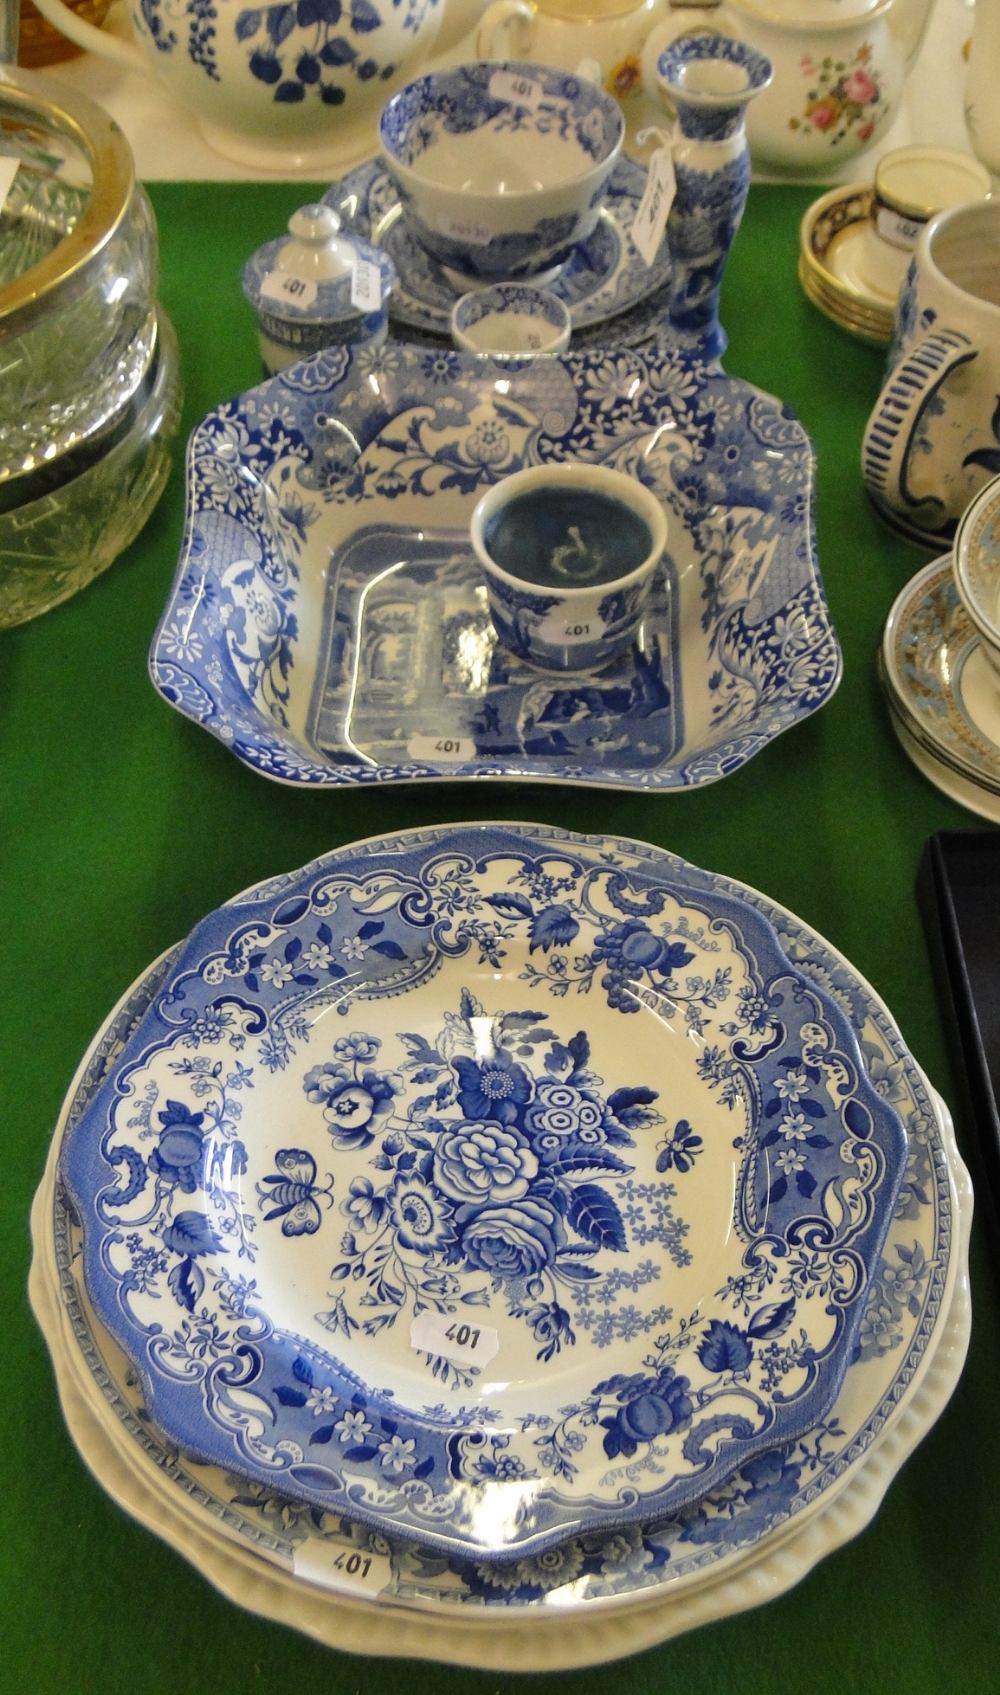 Spode Italian pattern fruit bowl, teaware and other Spode blue and white items.